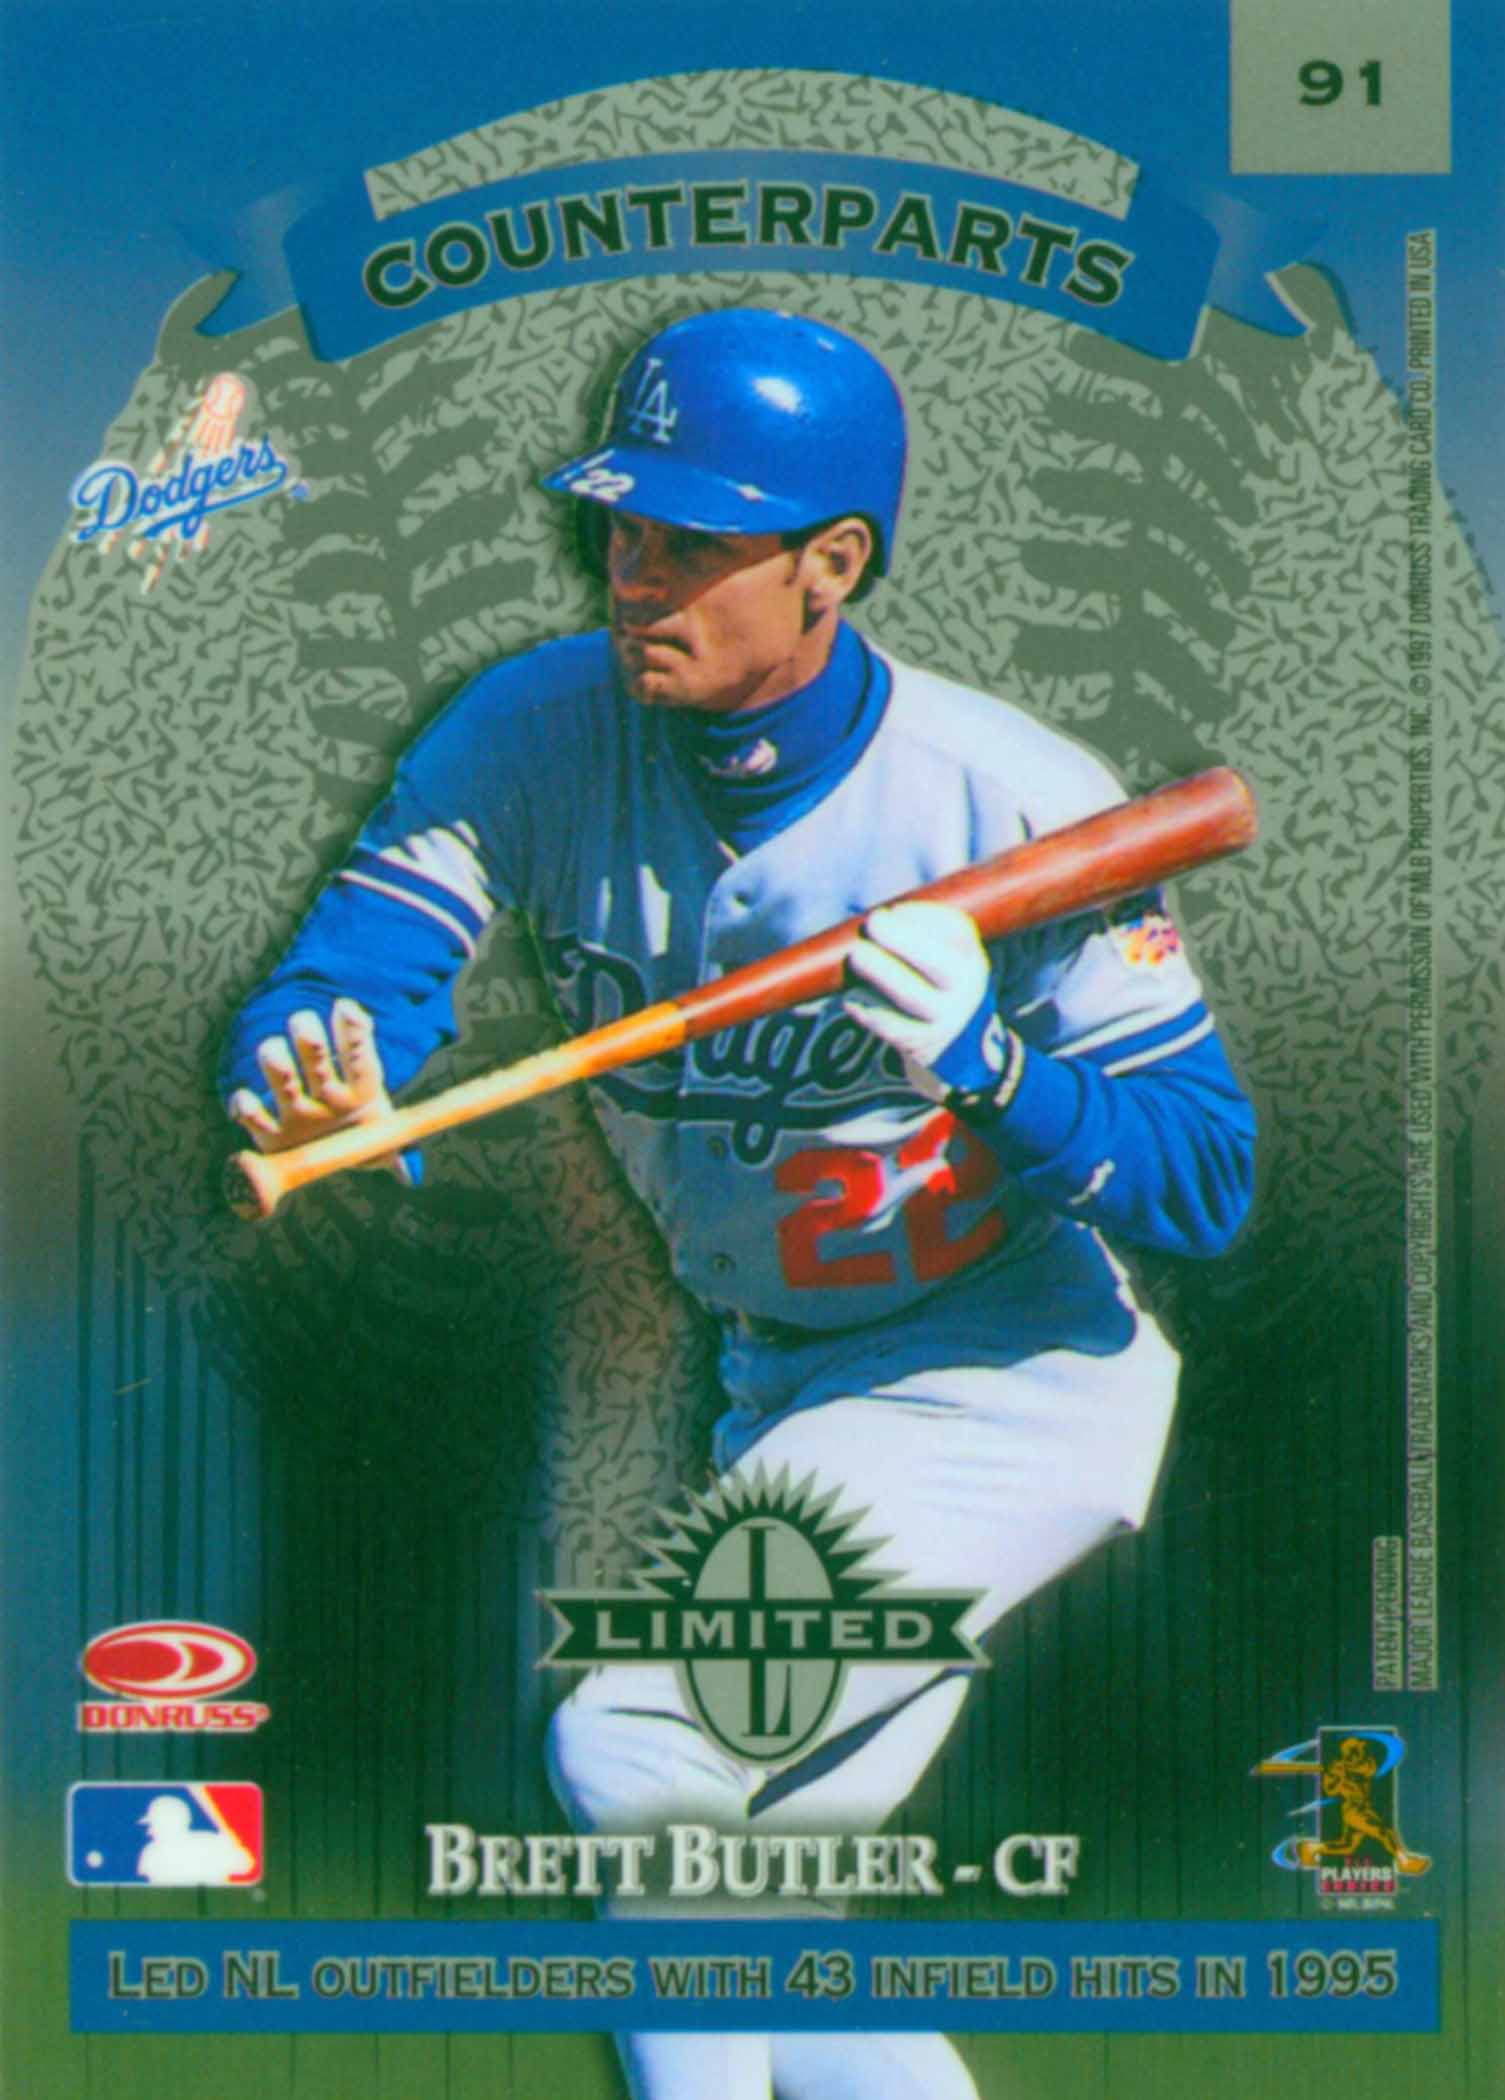 1997 Donruss Limited Counterparts